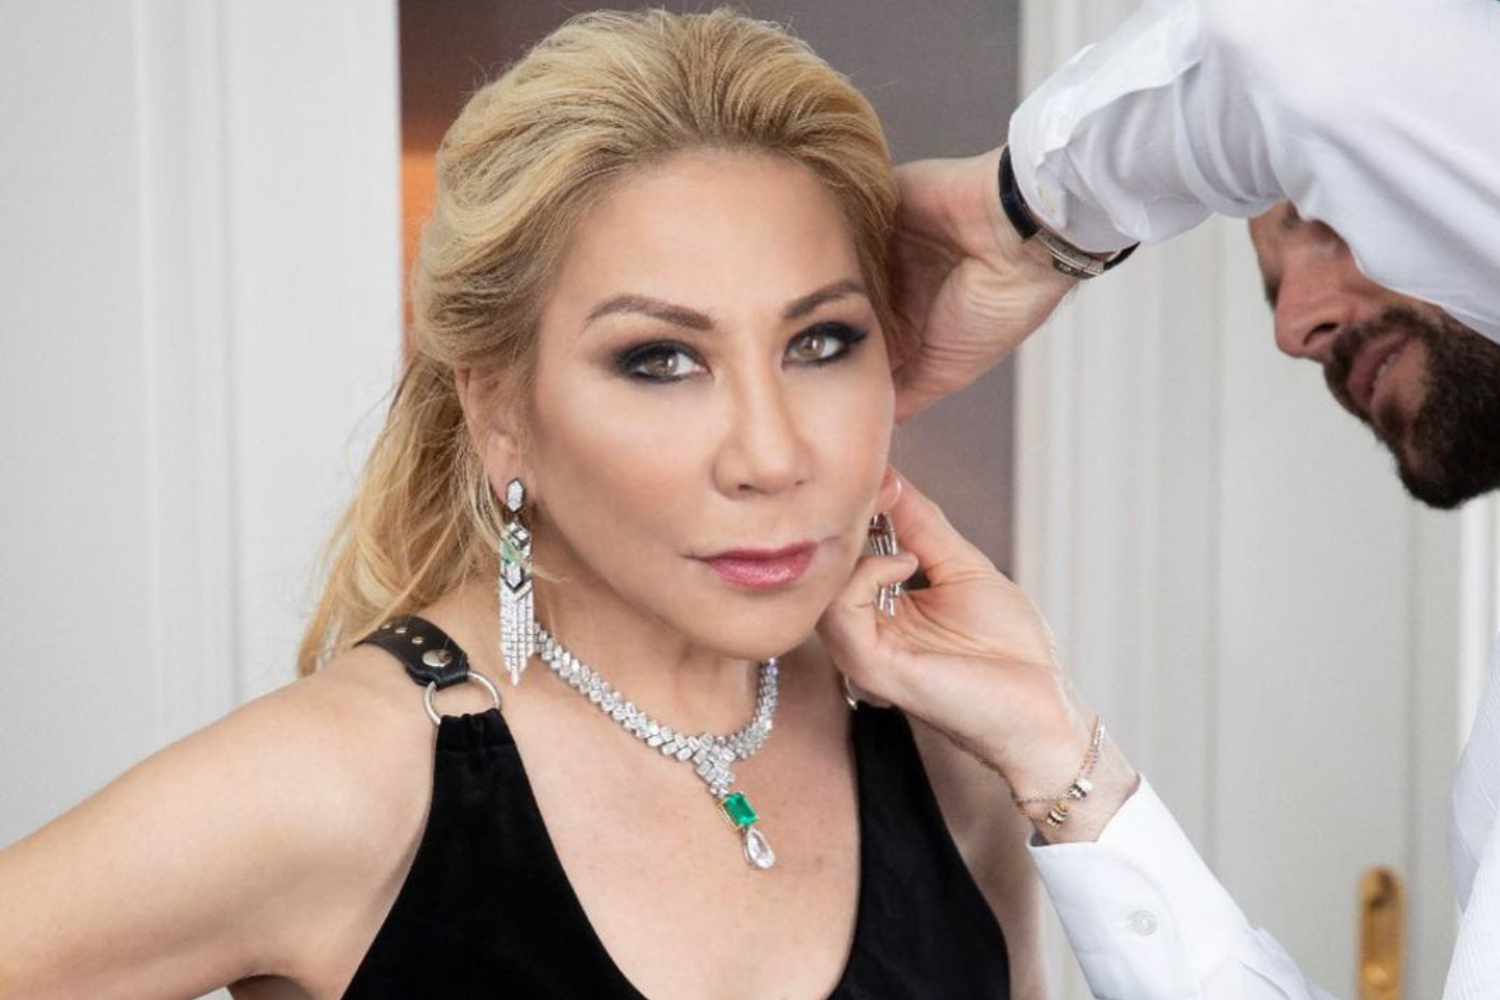 Bling Empire's Anna Shay has an estimated net worth of $600 million